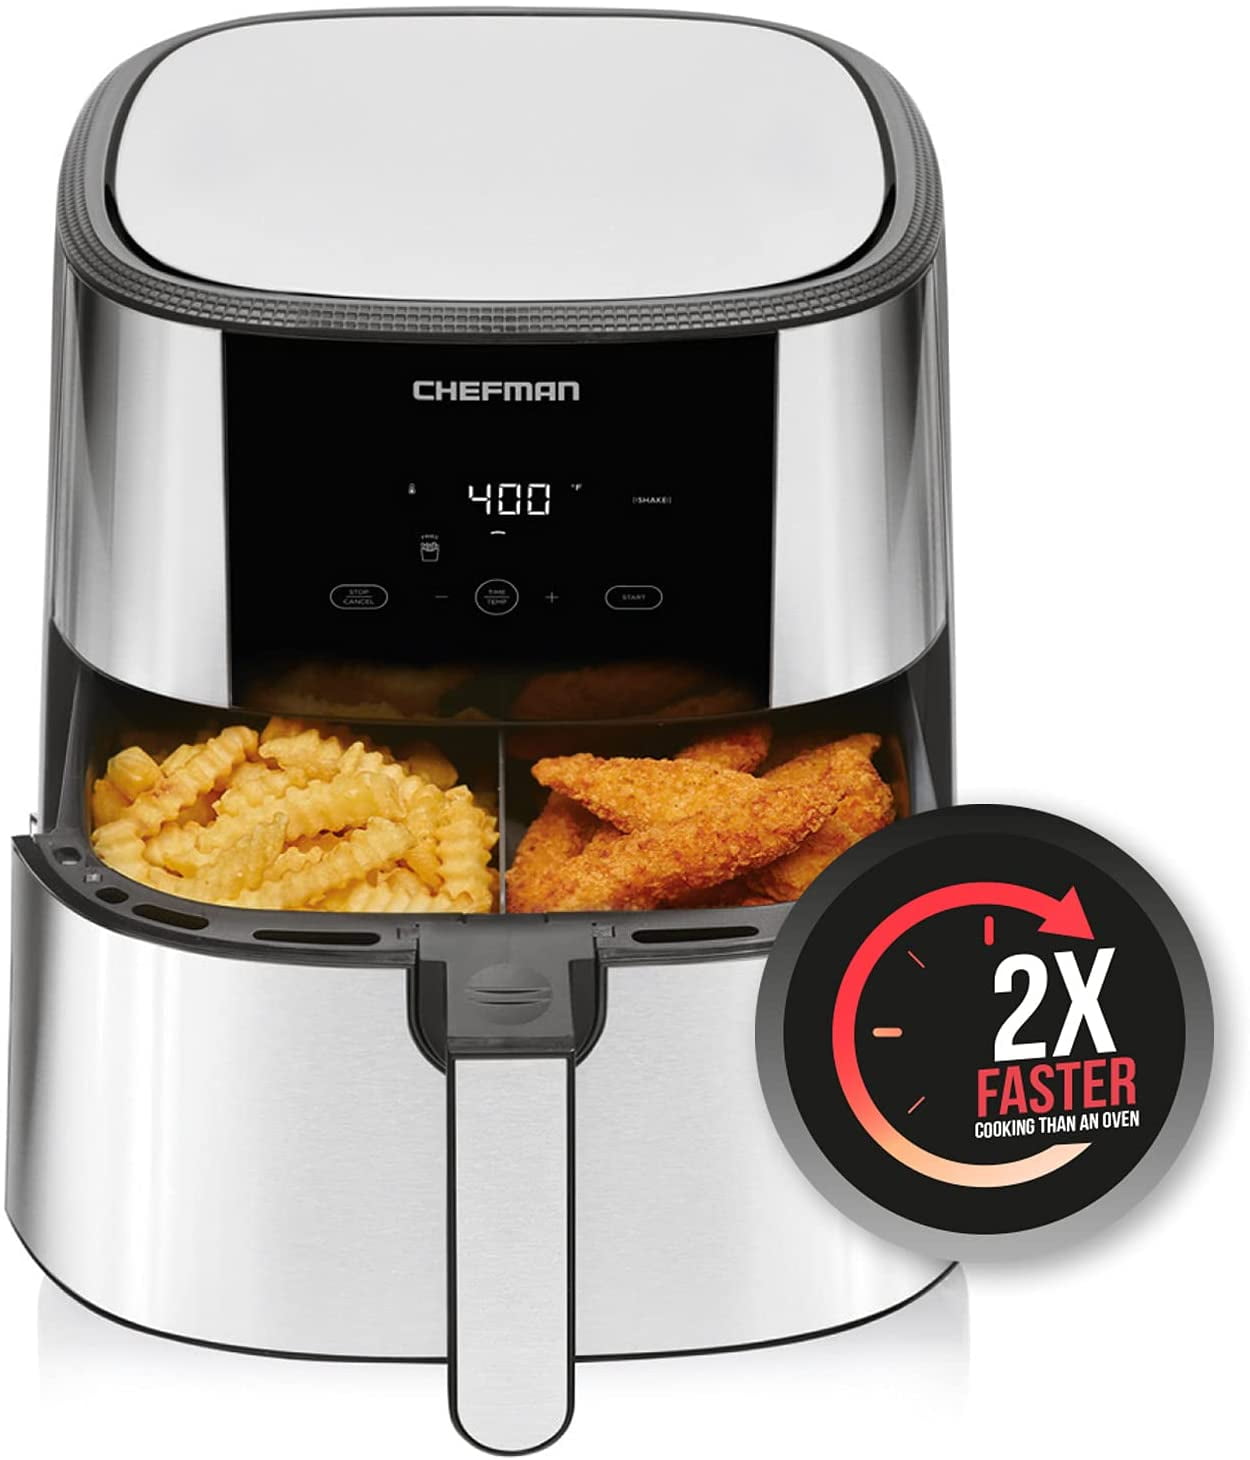 The Chefman air fryer finally convinced me that air fryers are